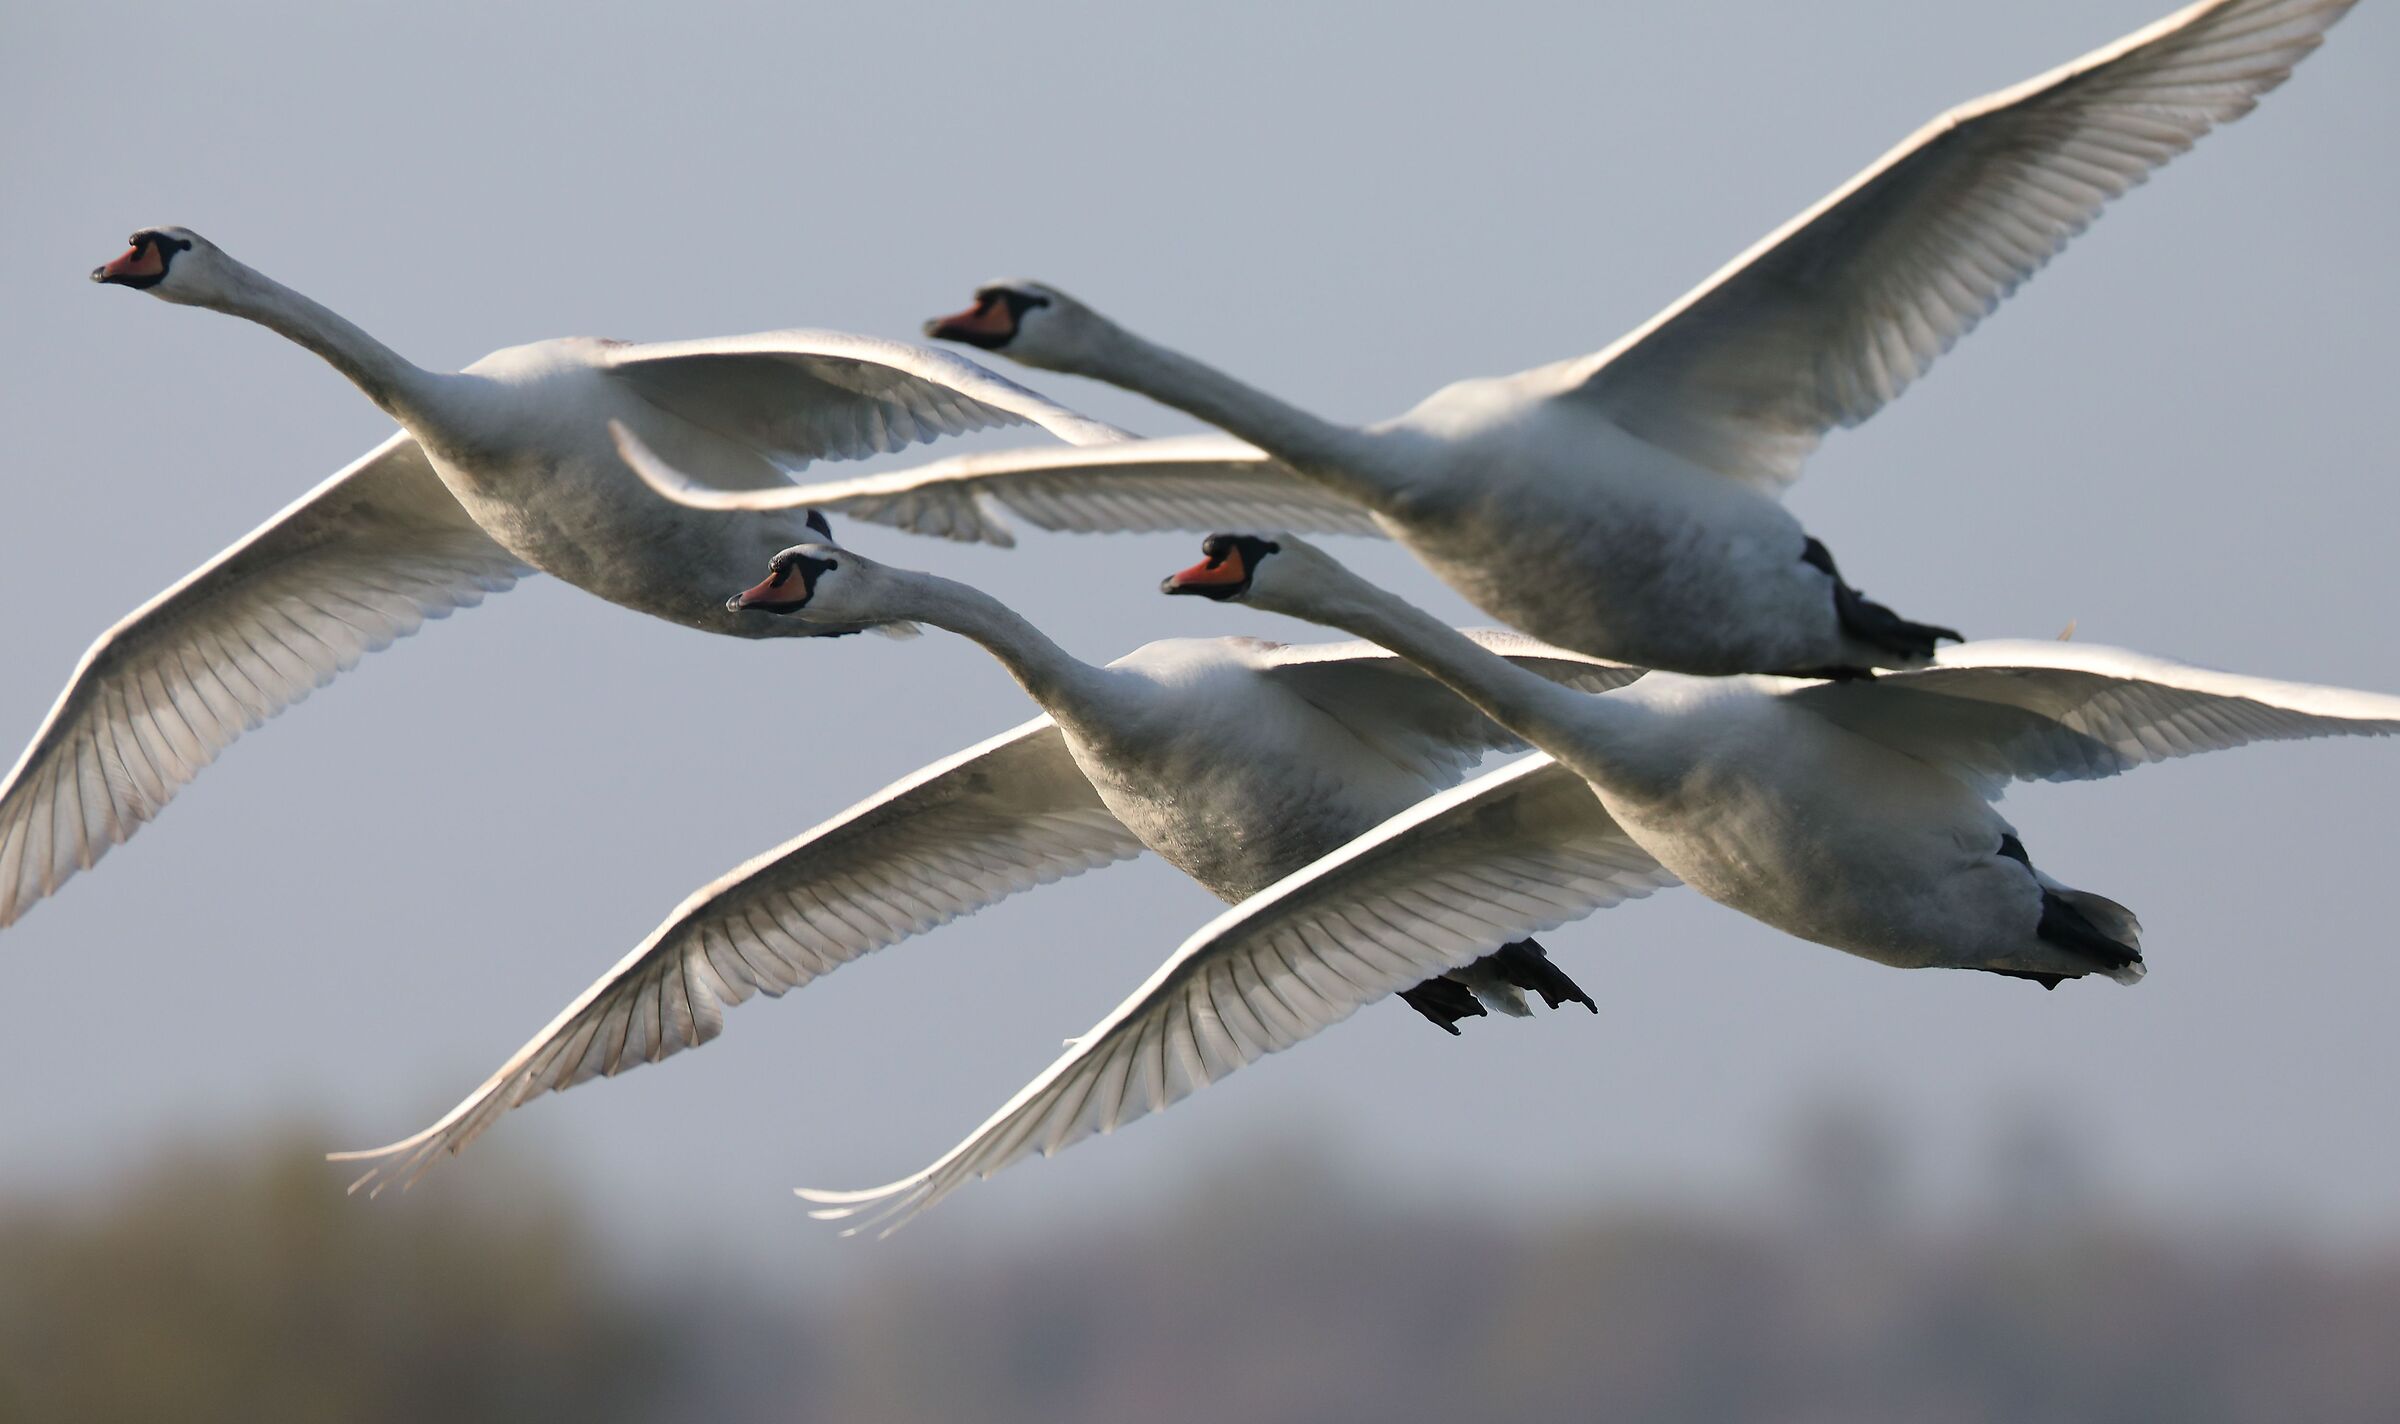 4 swans in tight formation...